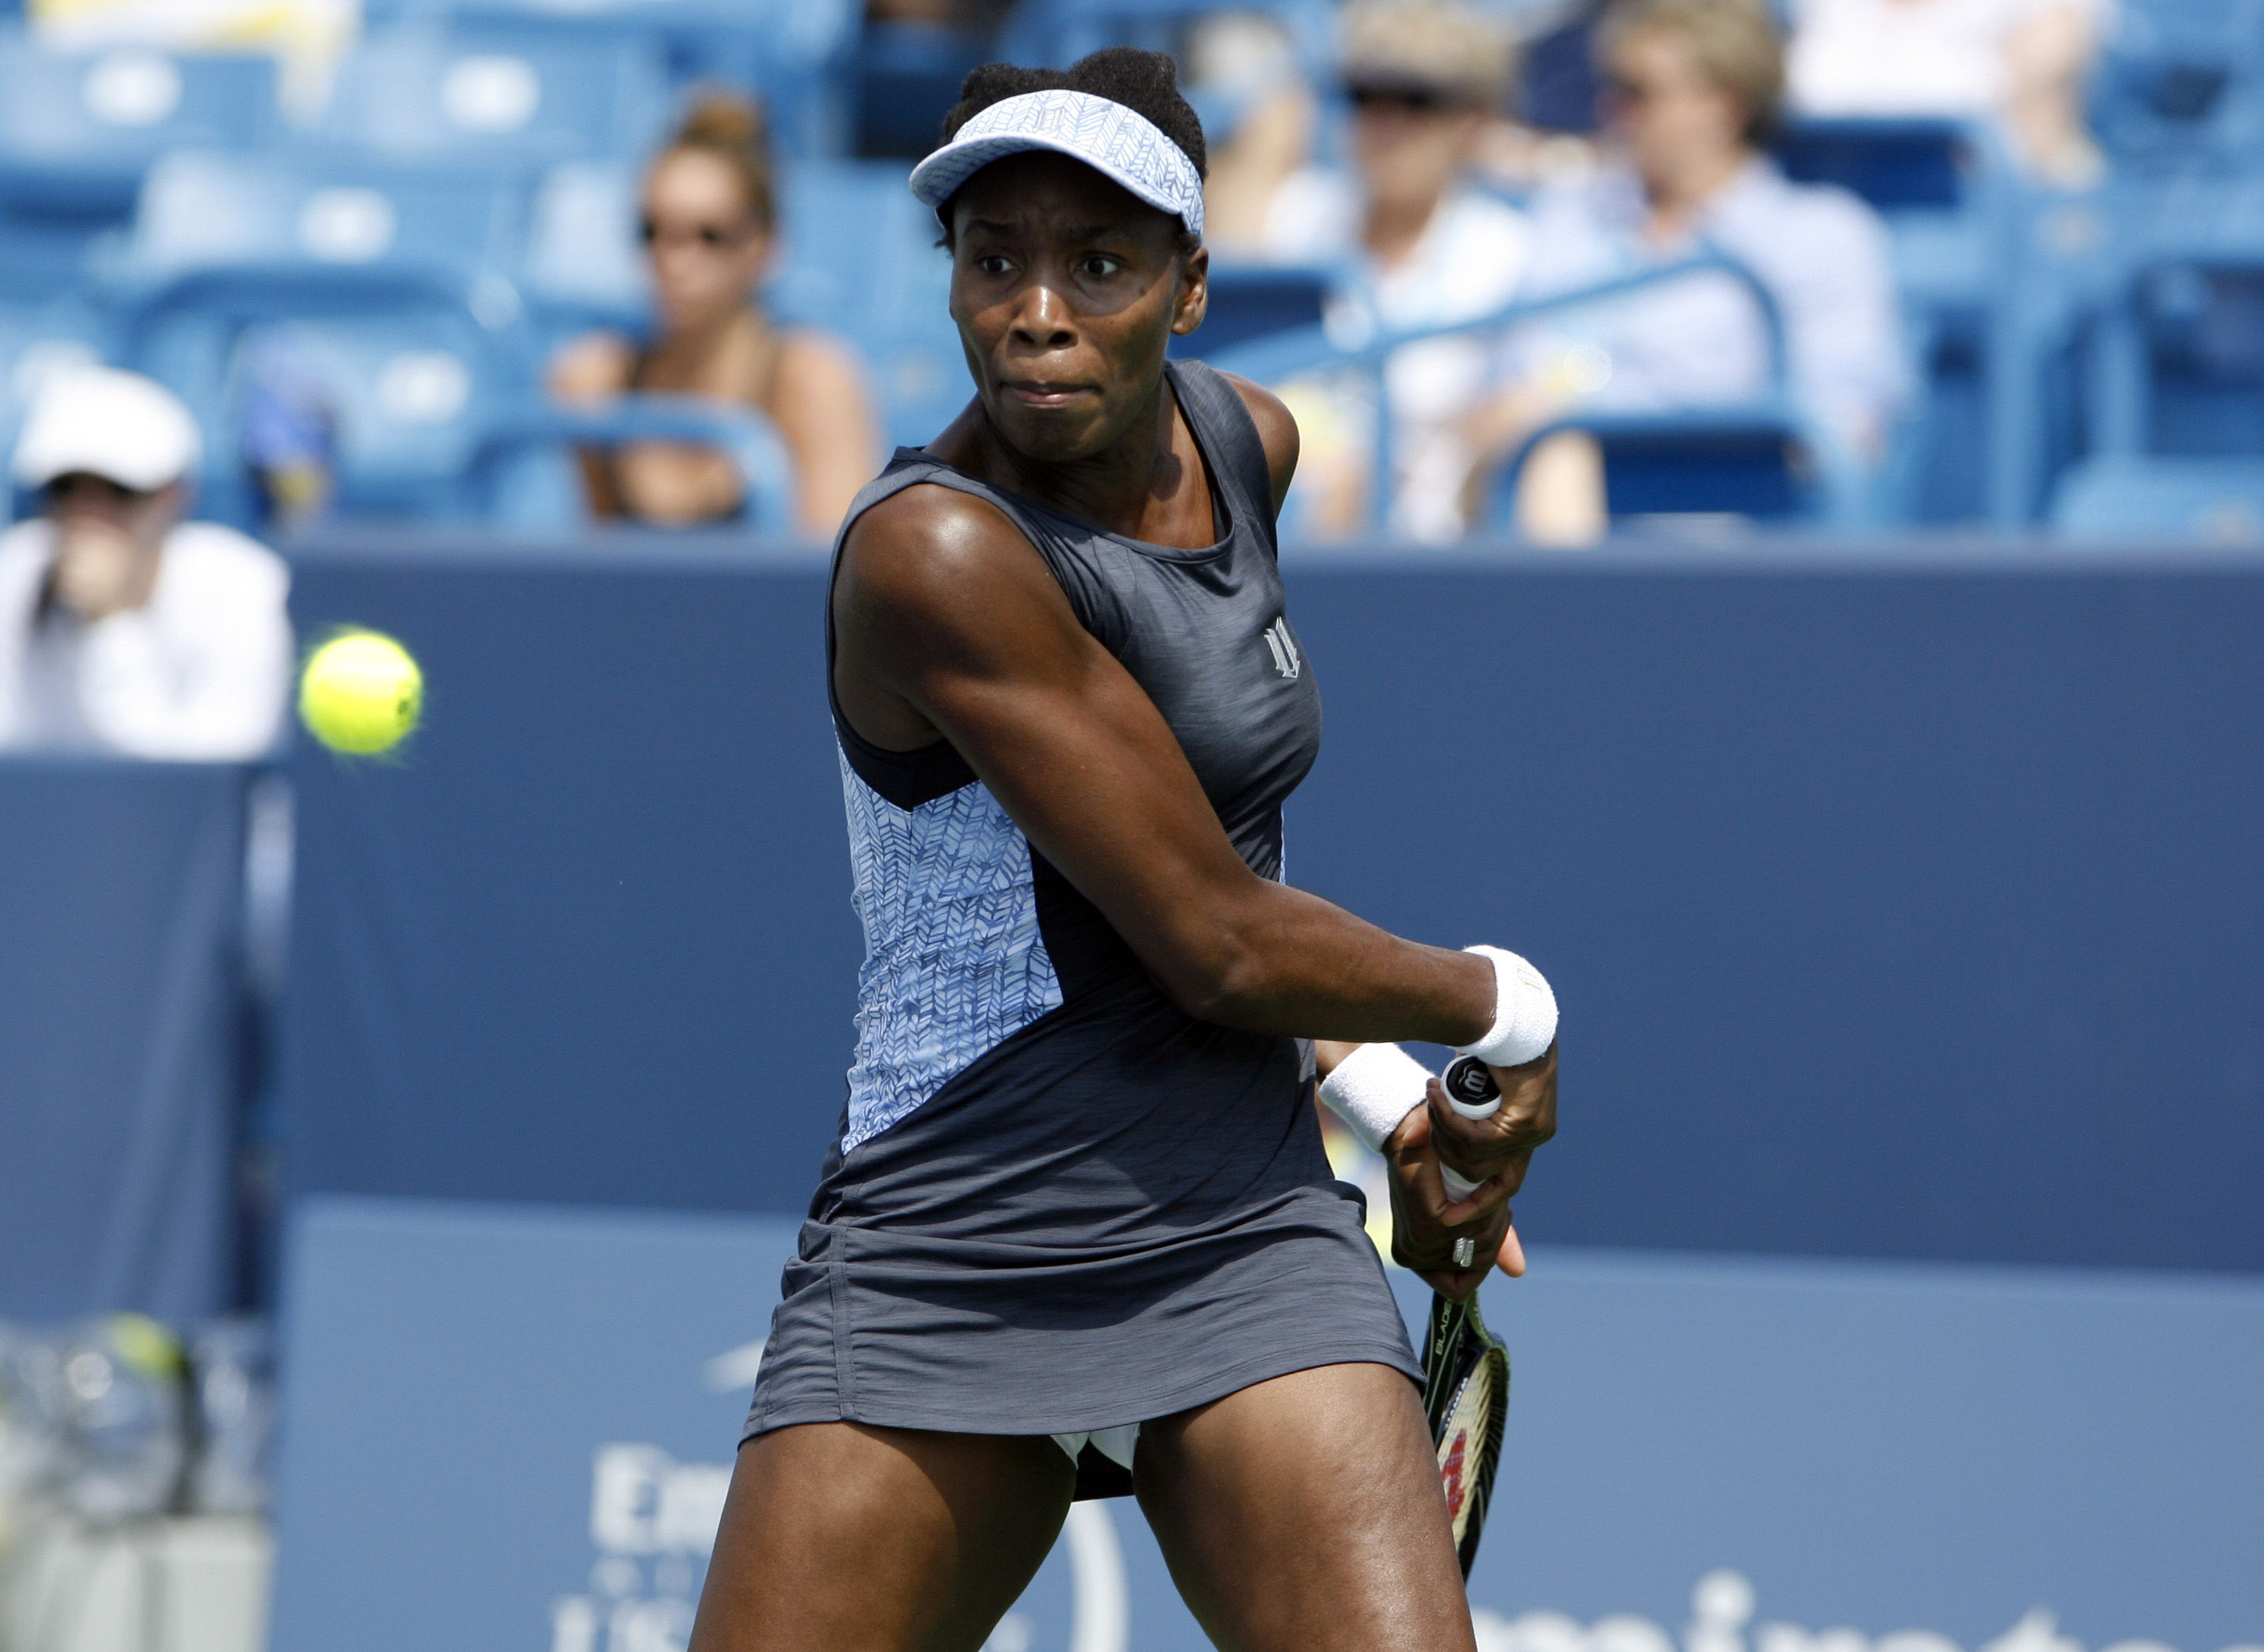 Venus Williams Made Her Professional Tennis Debut Exactly 20 Years Ago 